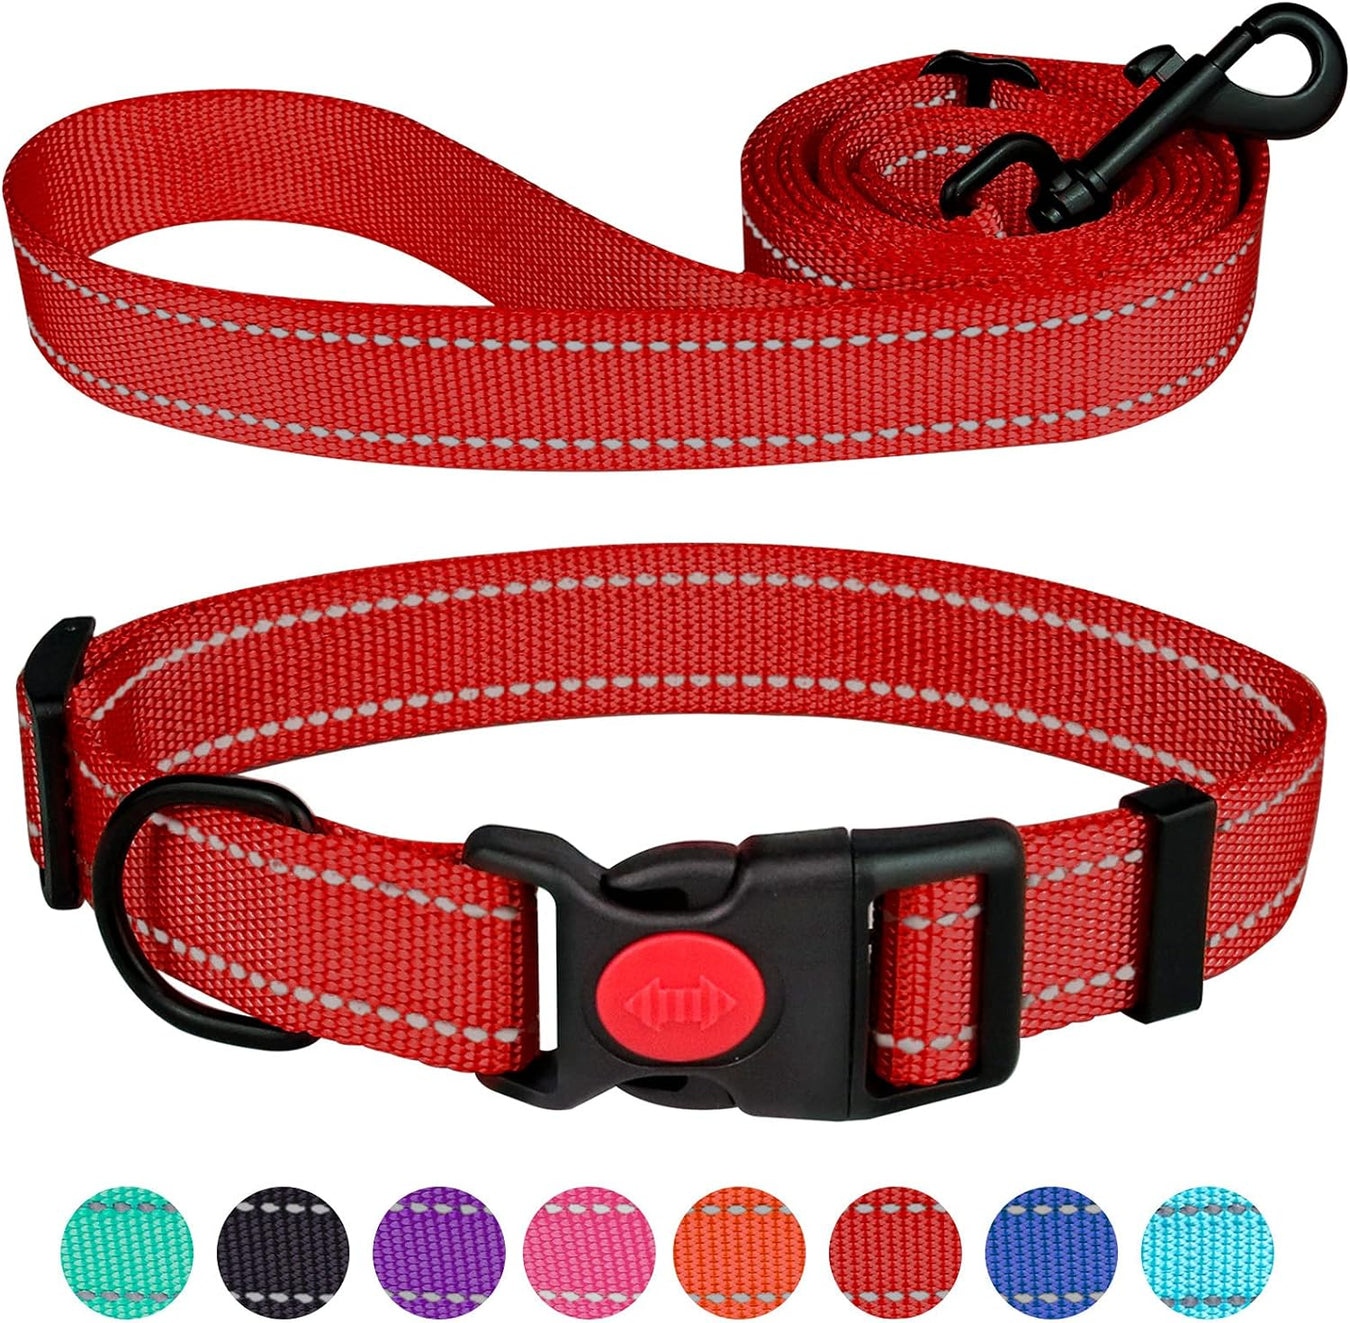 Collars and Leashes